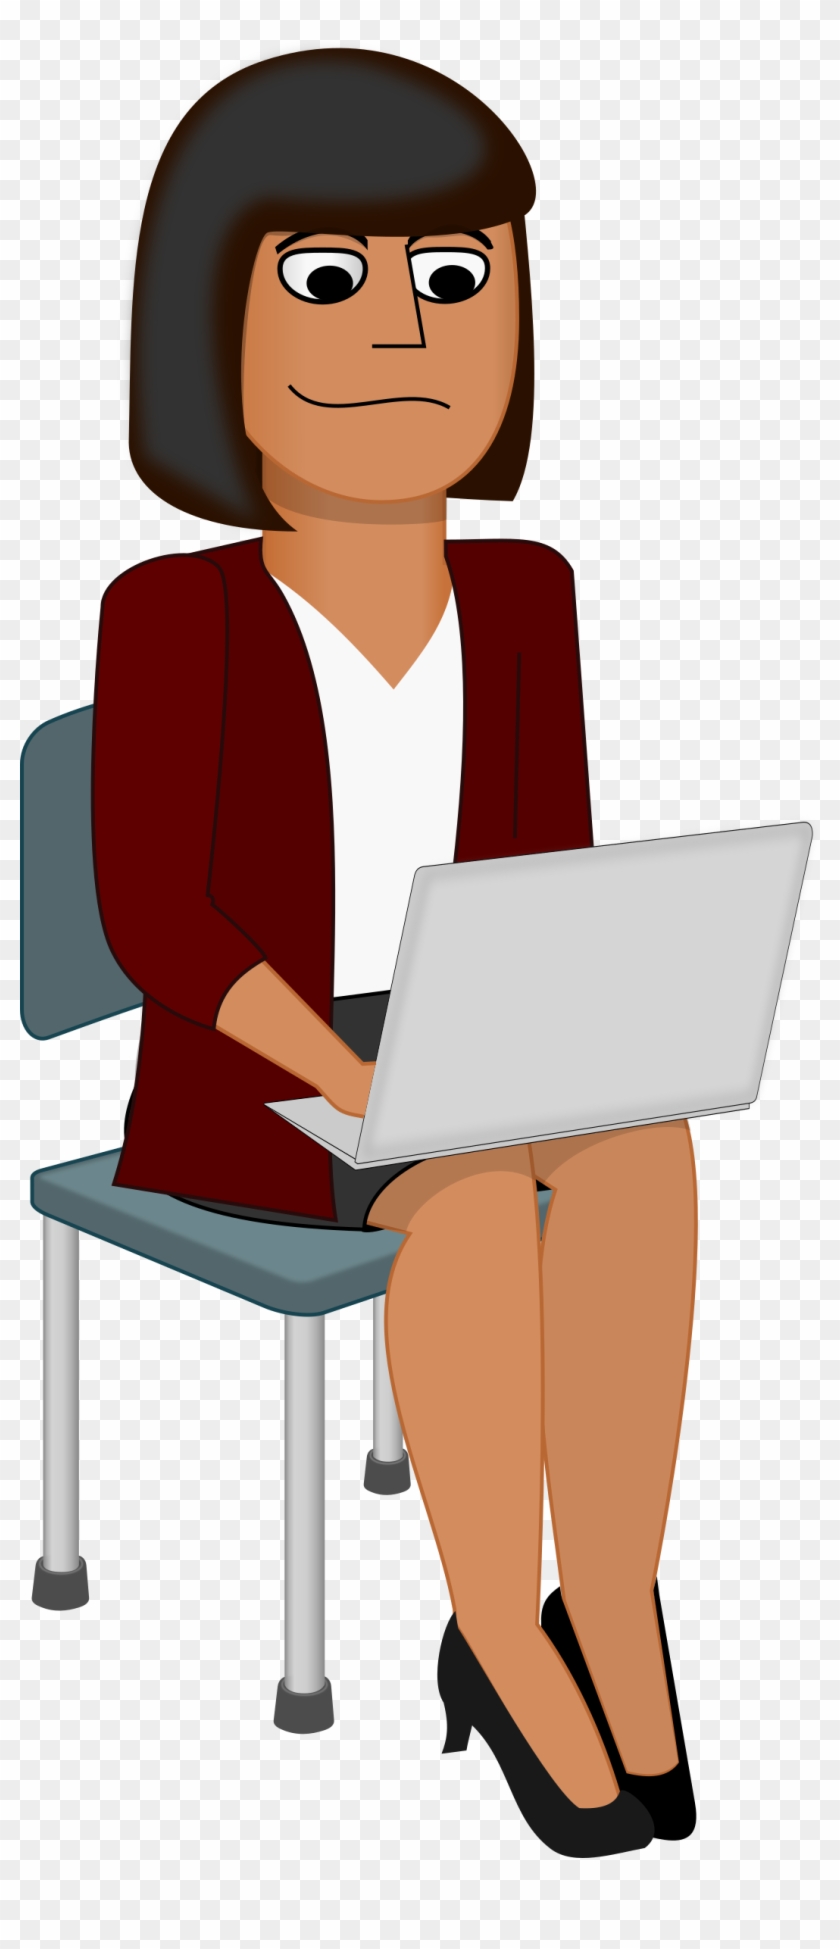 More From My Site - Cartoon Woman At Computer #273406